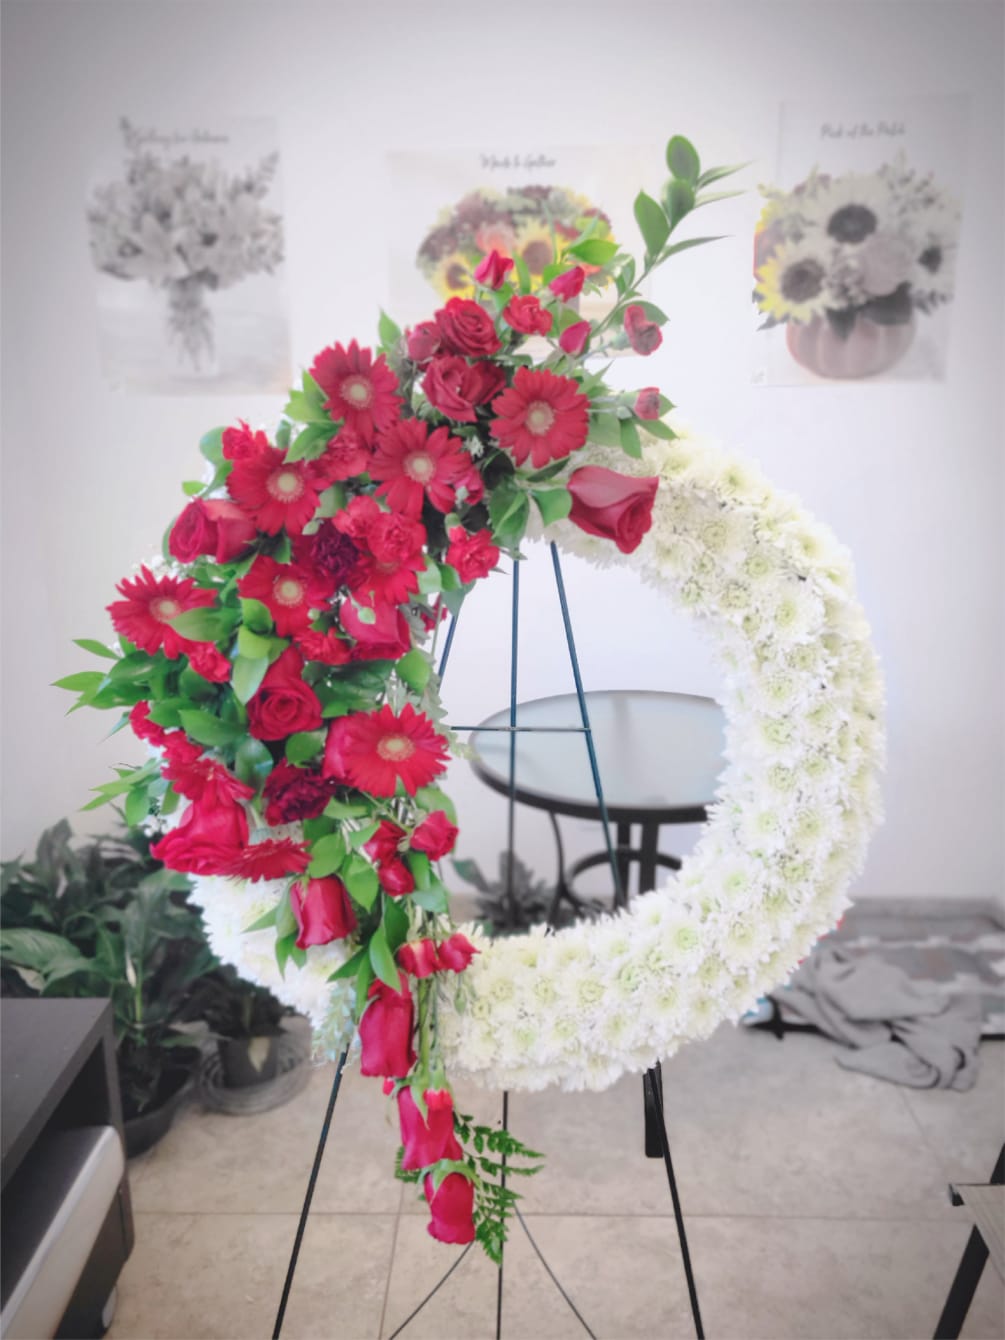 Garland made of white coushiun, roses, gerberas and red carnations